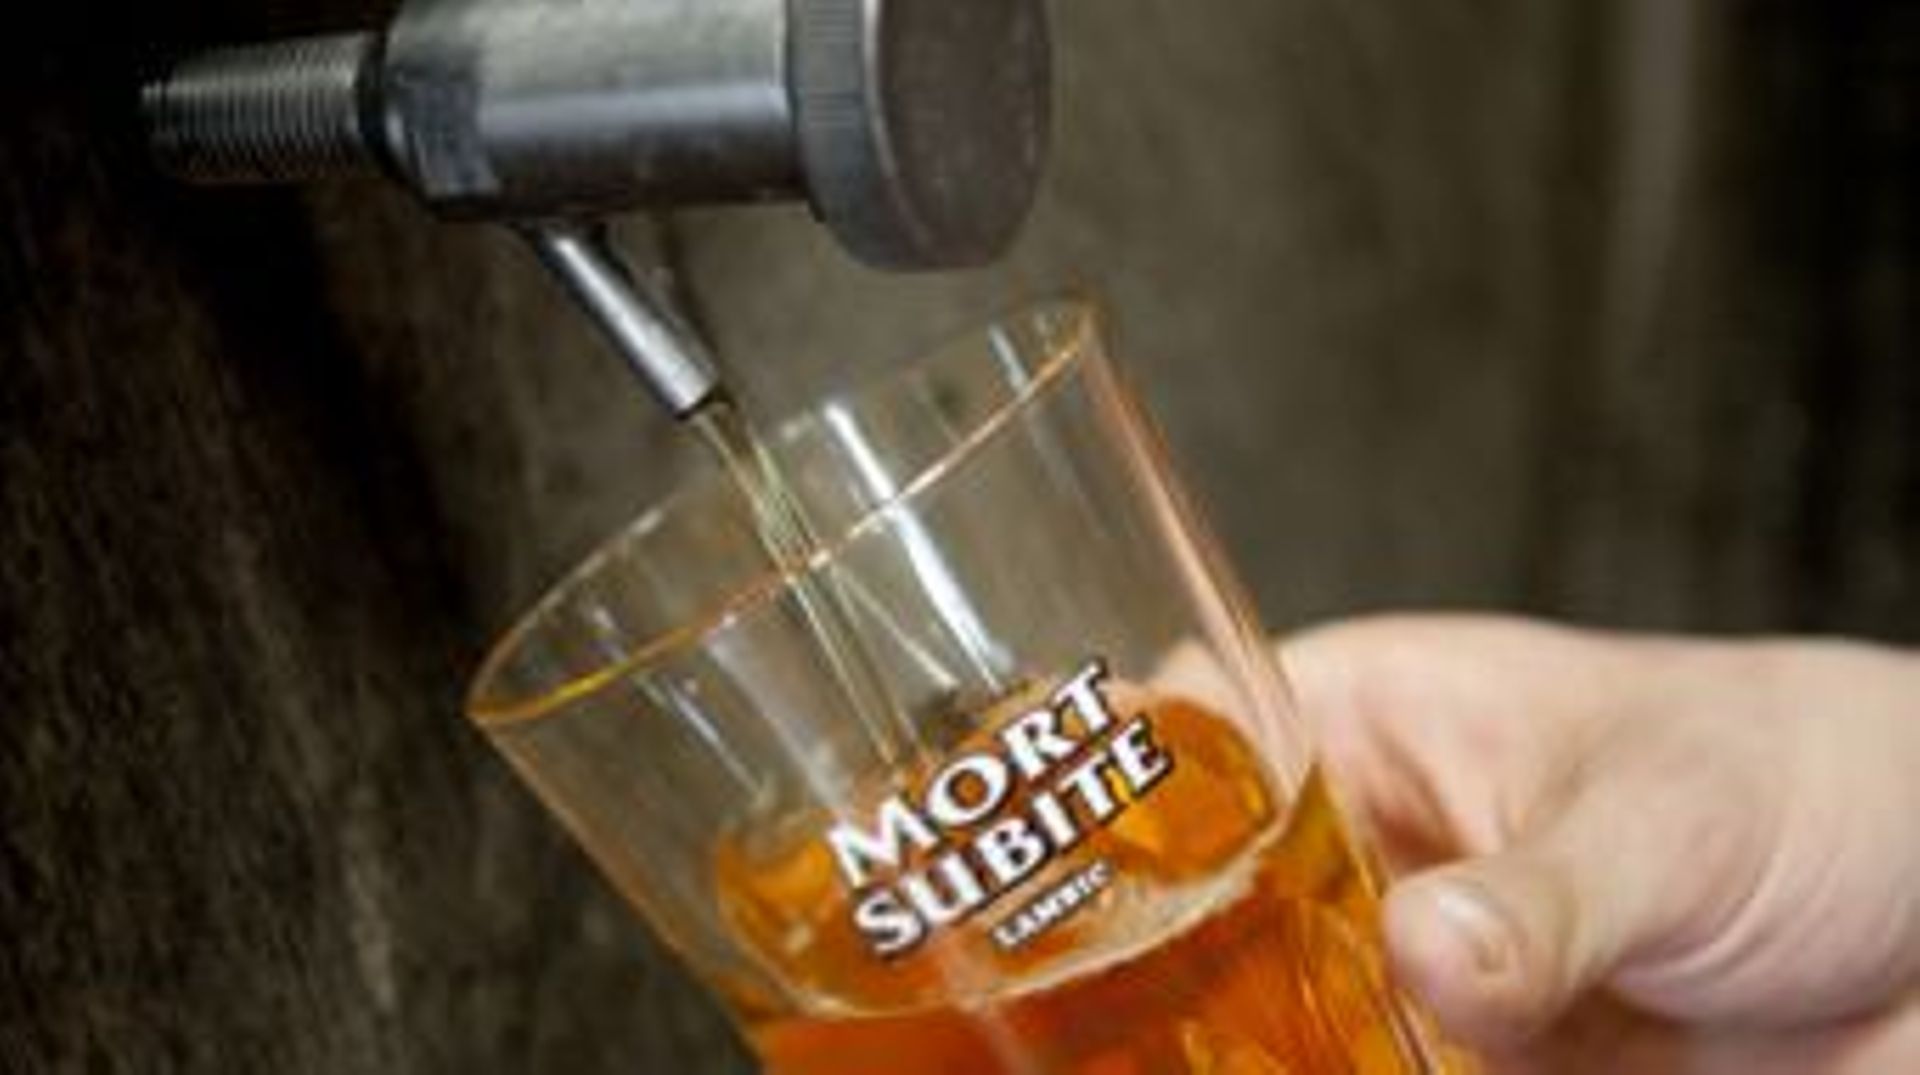 FOCUS COVERAGE, DISTRIBUTION REQUESTED TO BELGA 20140521 - KOBBEGEM, BELGIUM: Illustration picture shows a Mort Subite beer flowing from the tap at the brewery in Kobbegem, a brand of Belgian brewery Alken-Maes, Wednesday 21 May 2014. BELGA PHOTO CHRISTOP